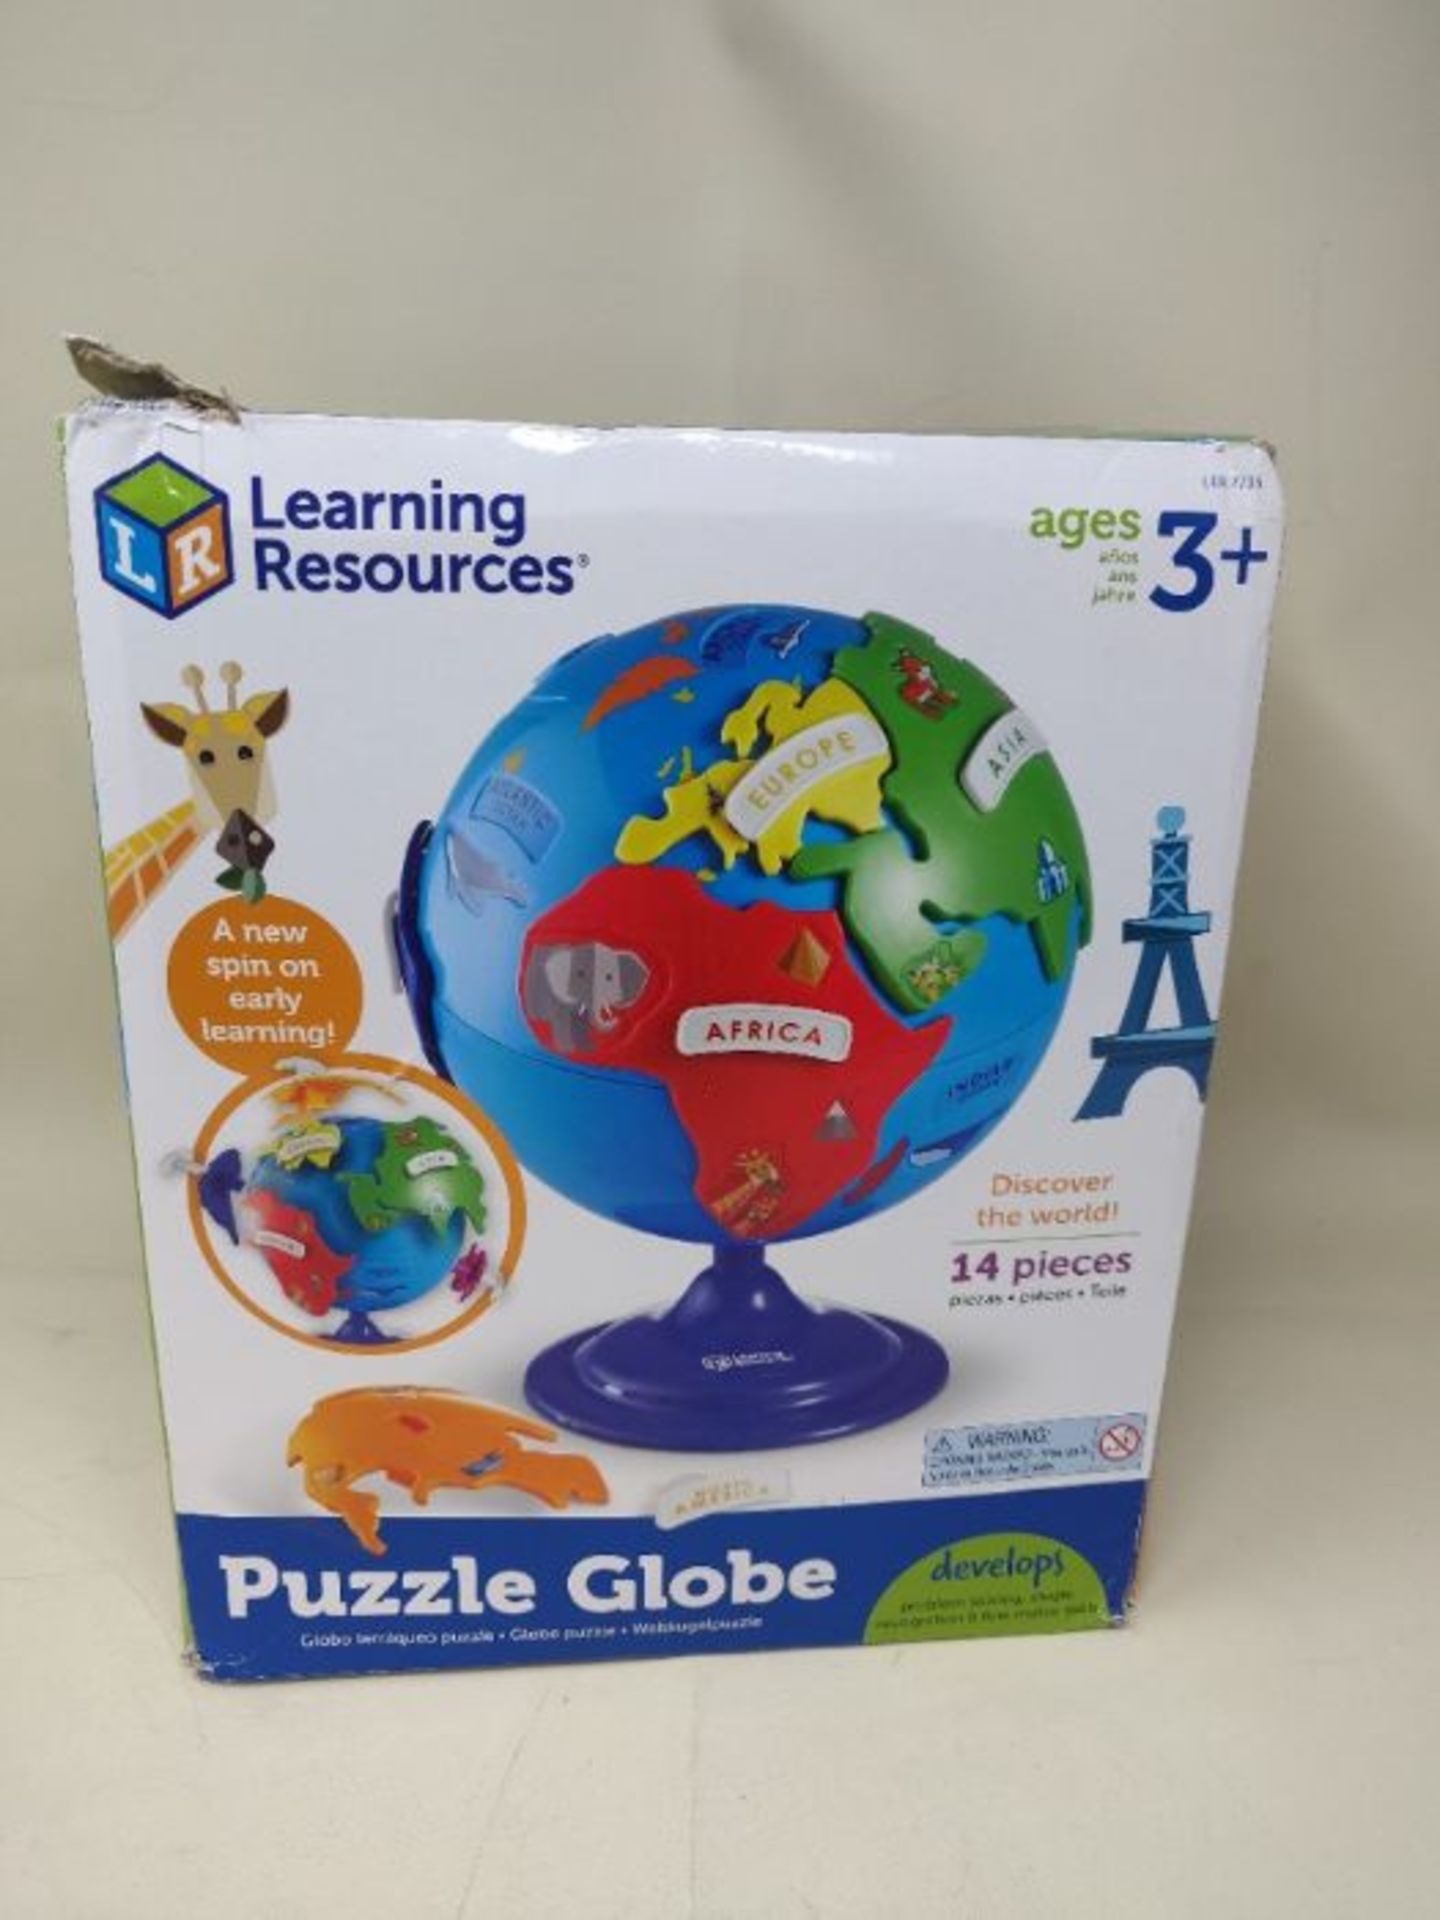 Learning Resources Puzzle Globe - Image 2 of 3